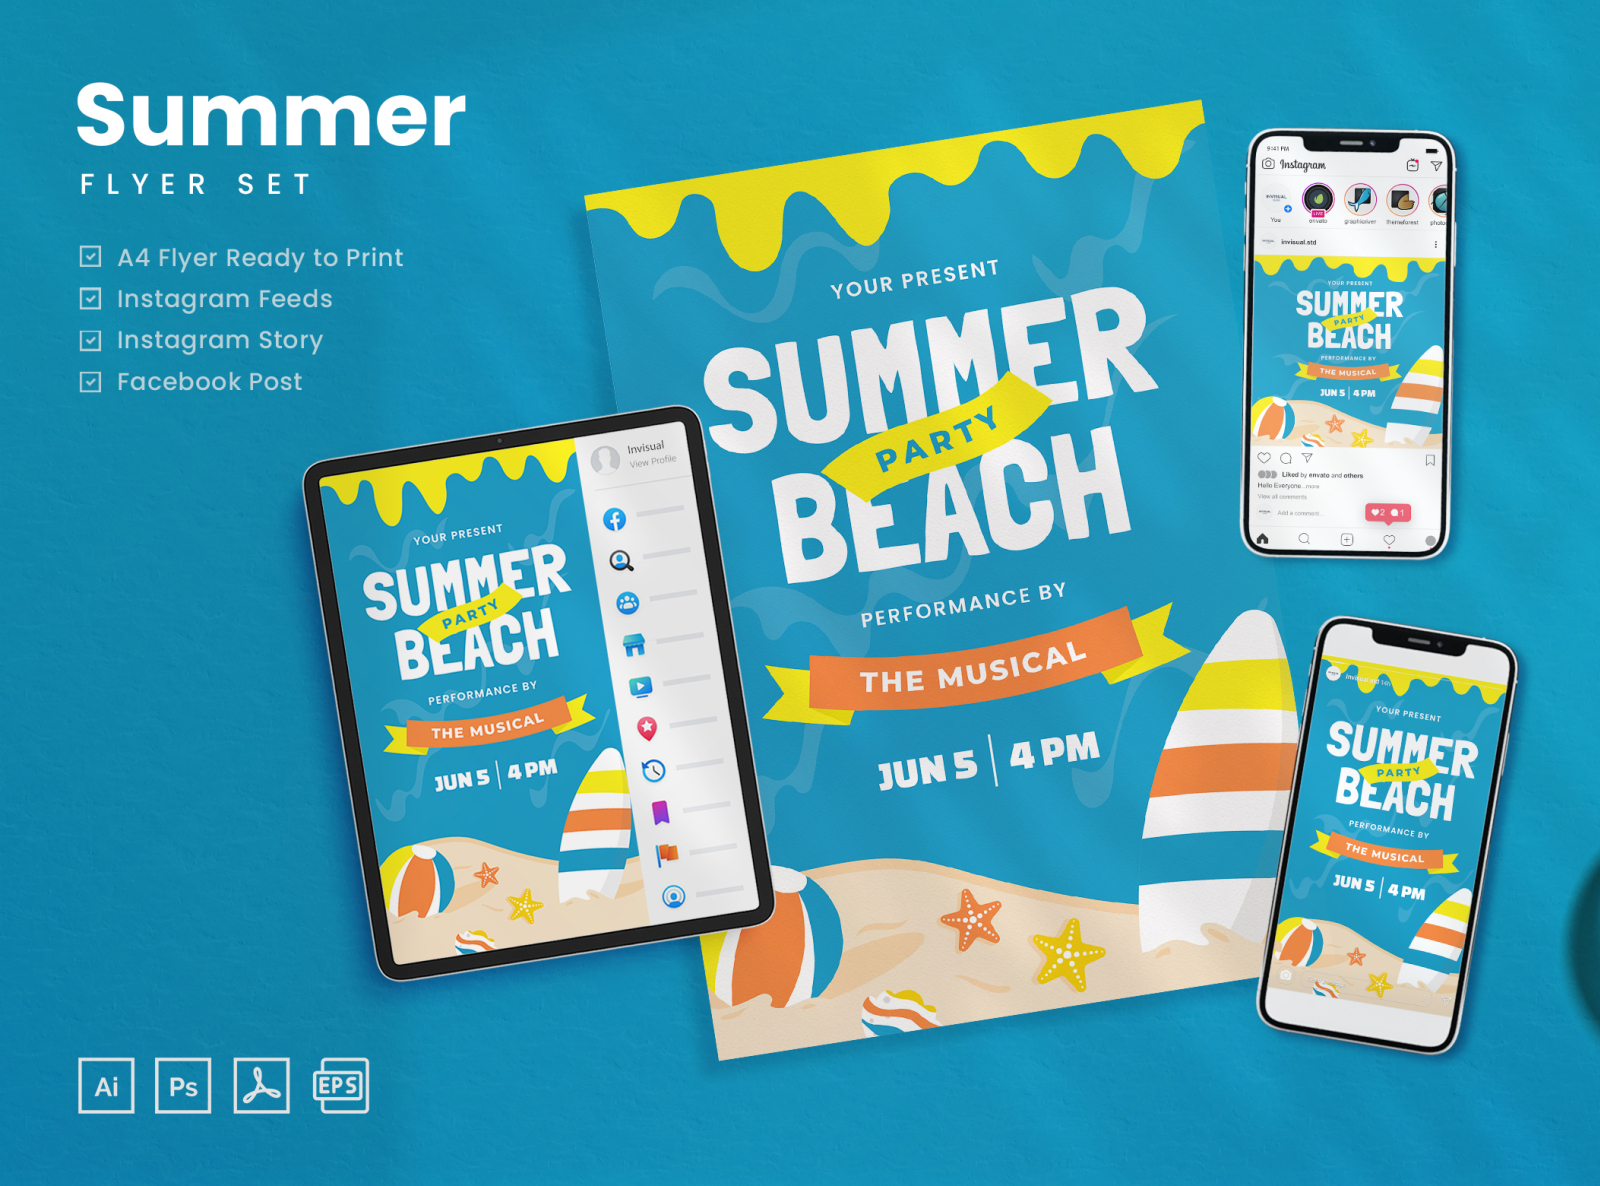 Summer - Flyer Set by Invisual Studio on Dribbble